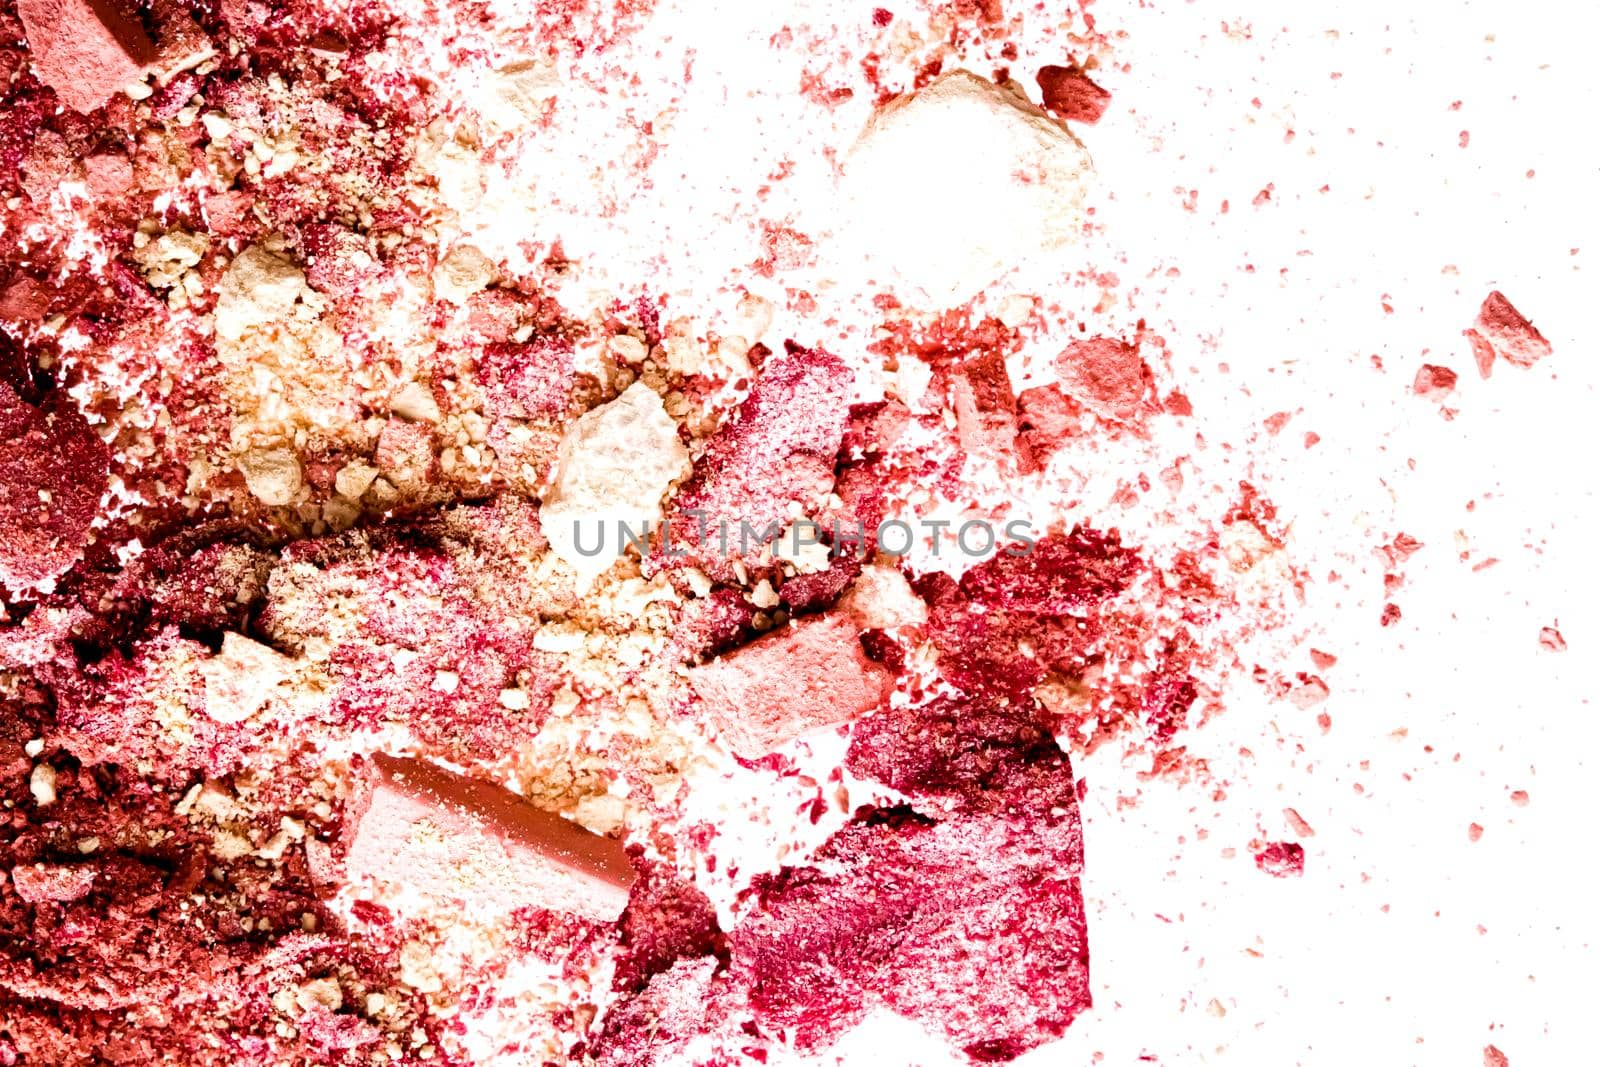 Powder cosmetics, mineral organic eyeshadow, blush or crushed cosmetic product isolated on white background, makeup and beauty banner, flatlay design by Anneleven